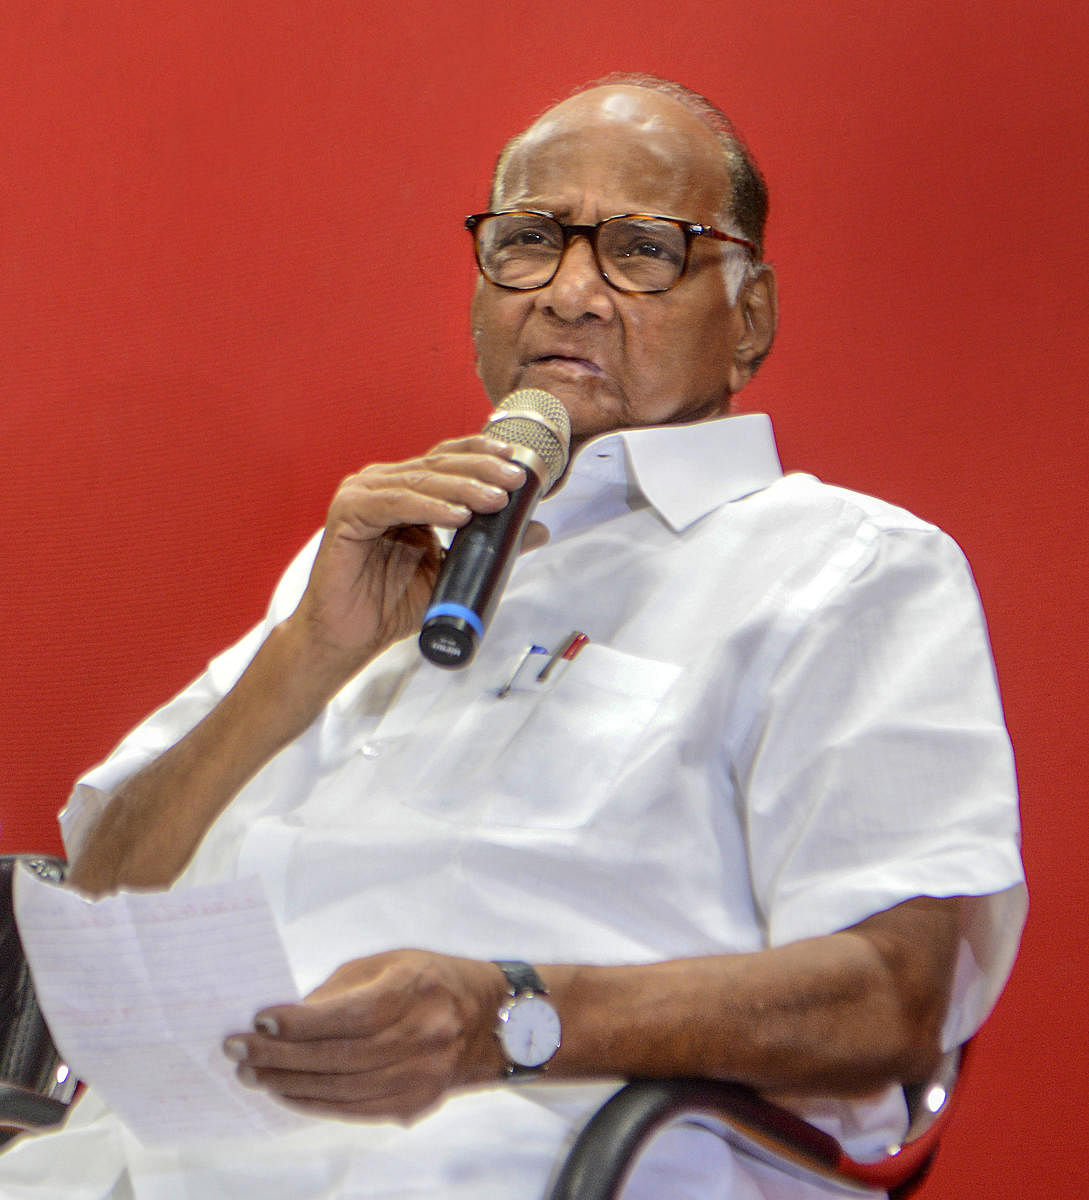 The Pawar-led party only retained its 2014 tally of five seats, four of which came from Maharashtra. The Congress was reduced to a single seat in the state. (PTI Photo)